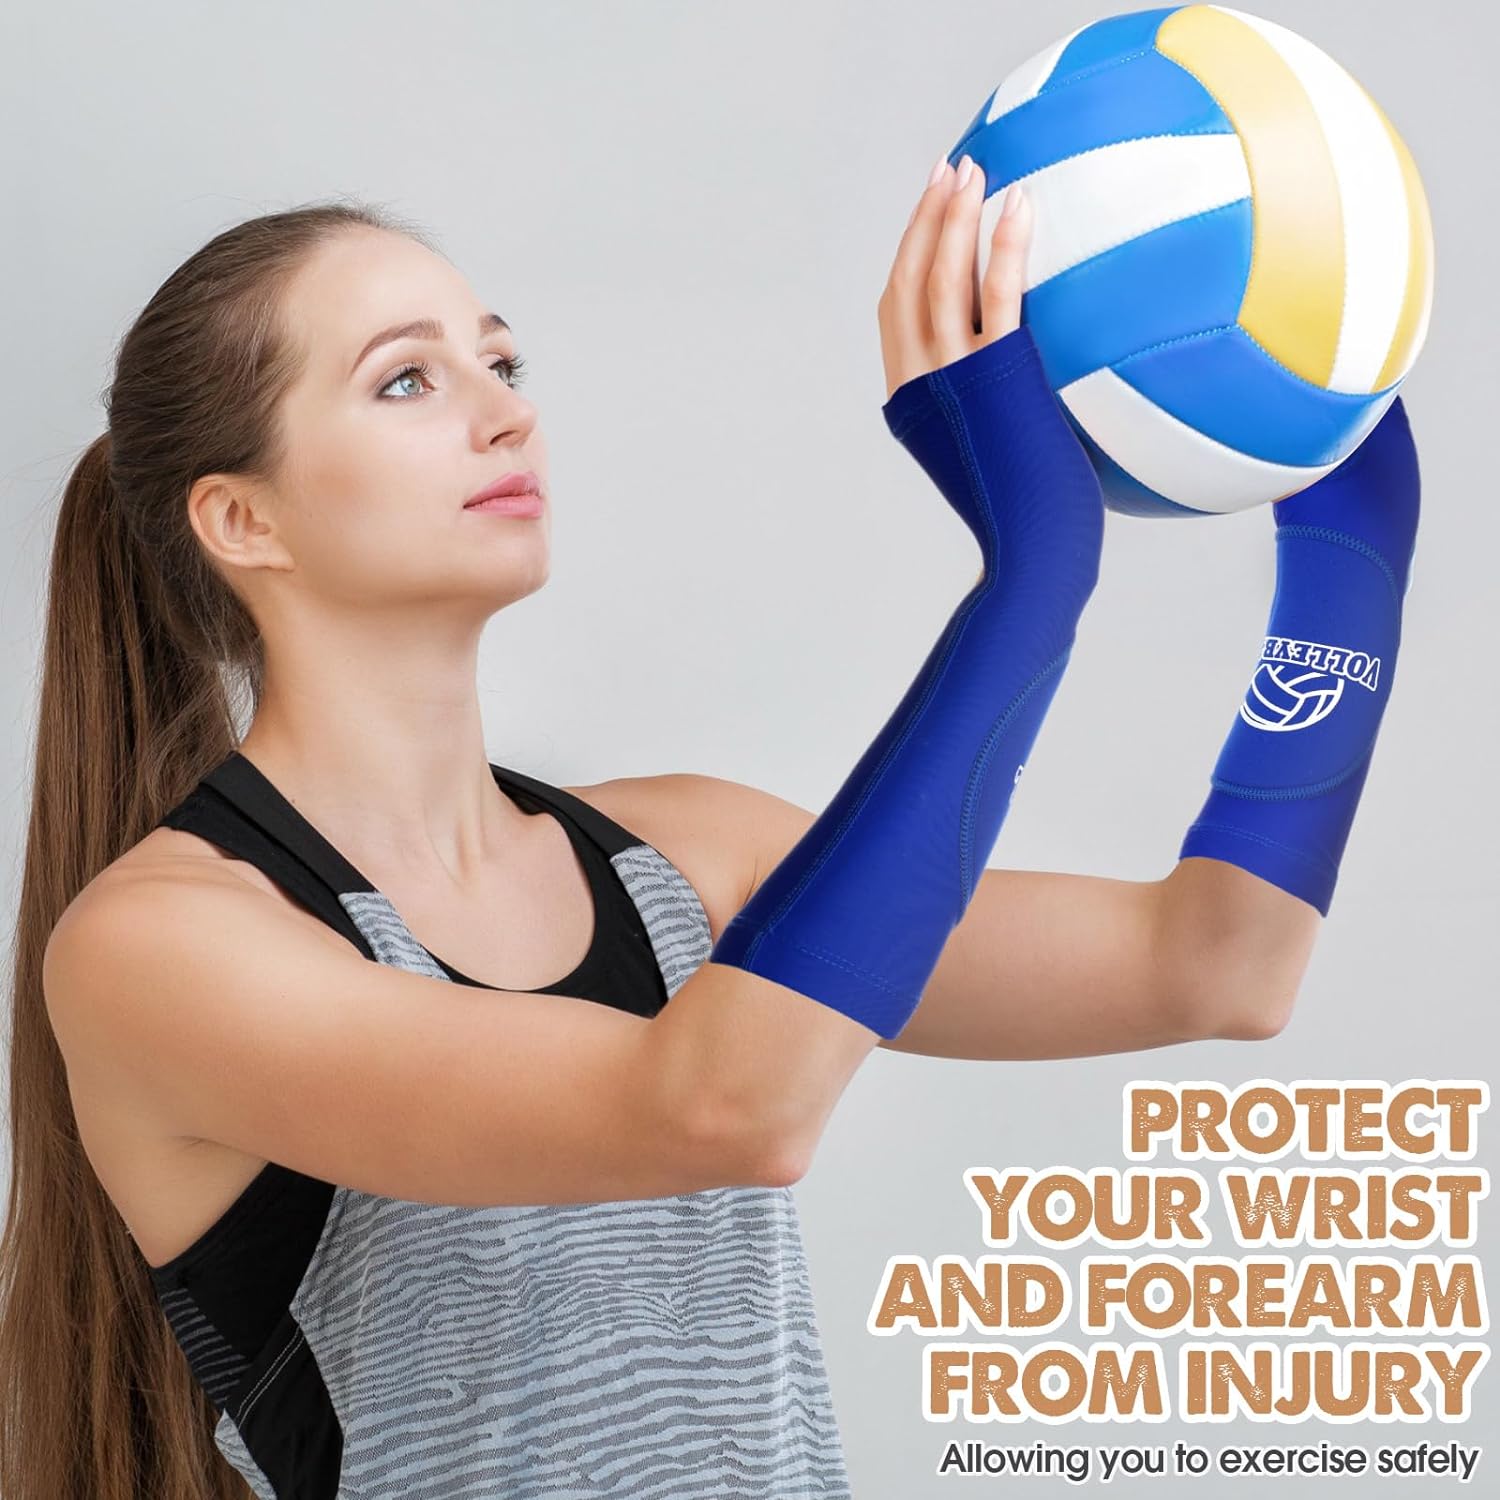 Breathffy 6 Pairs Volleyball Knee Pads and 6 Pairs Volleyball Padded Passing Sleeves Protective Knee Brace Forearm Elbow Sleeve for Youth Teen Train Accessories